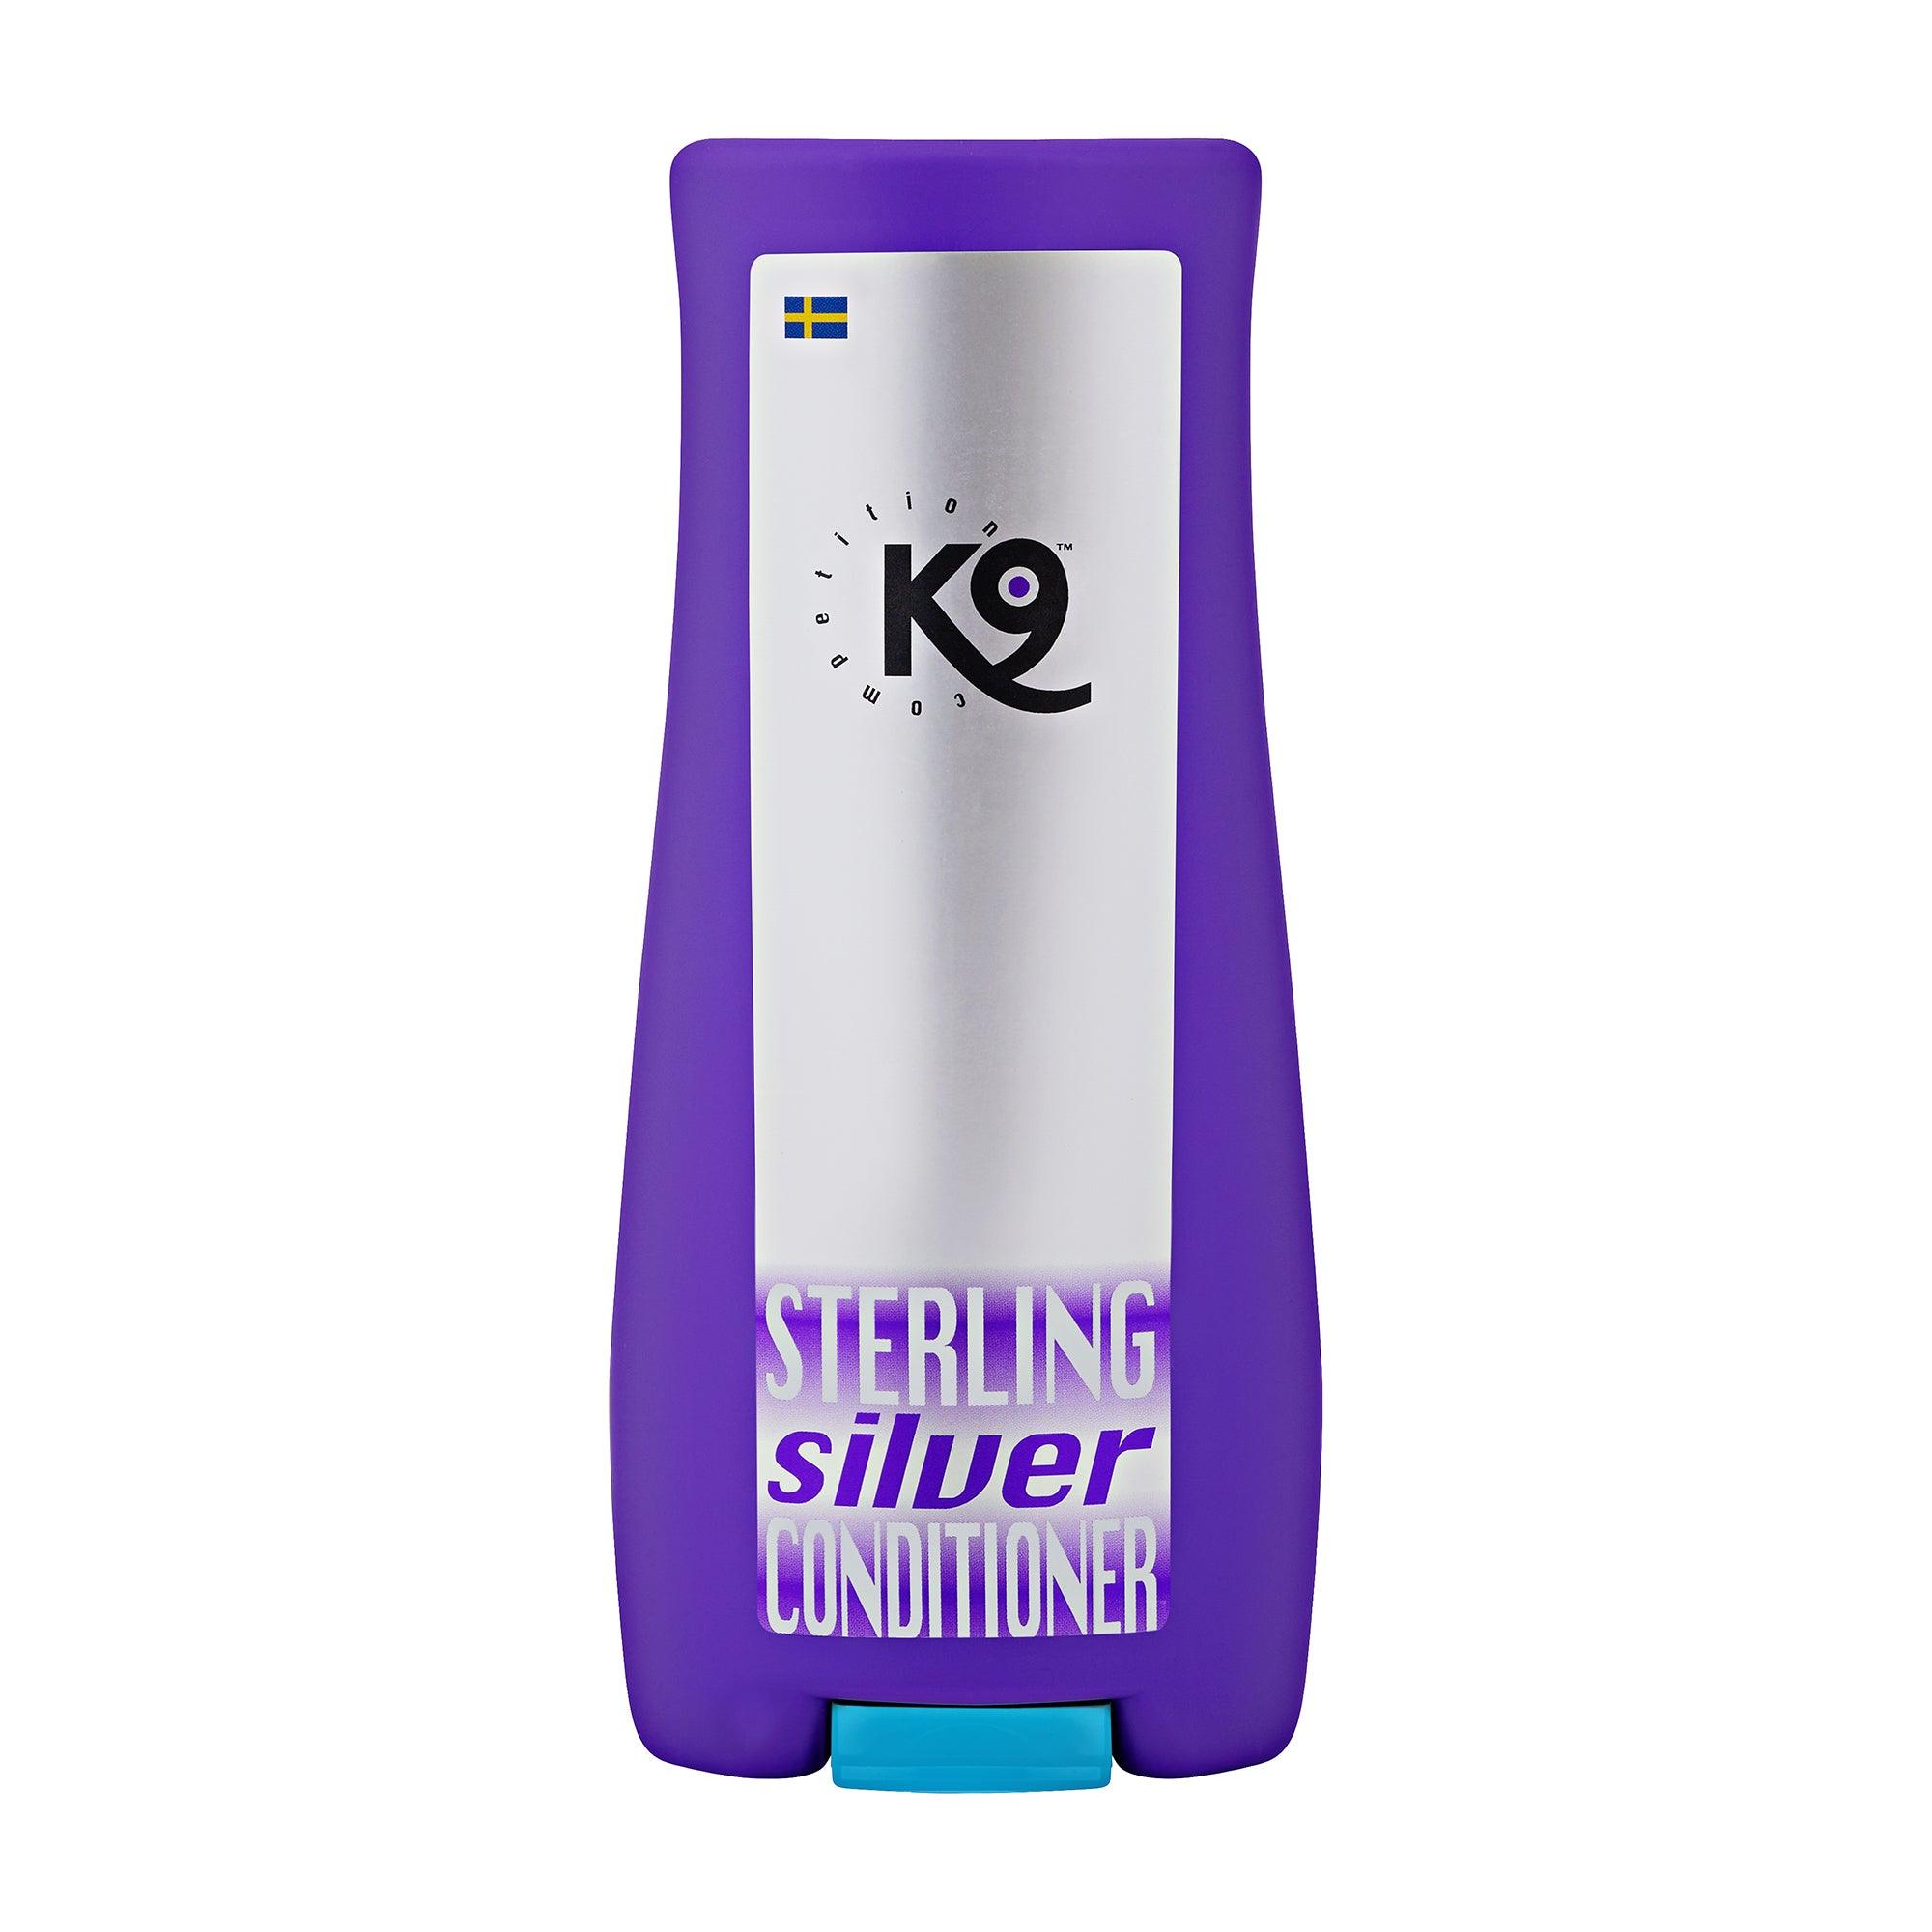 K9 Horse Sterling Silver Conditioner - K9 Competition